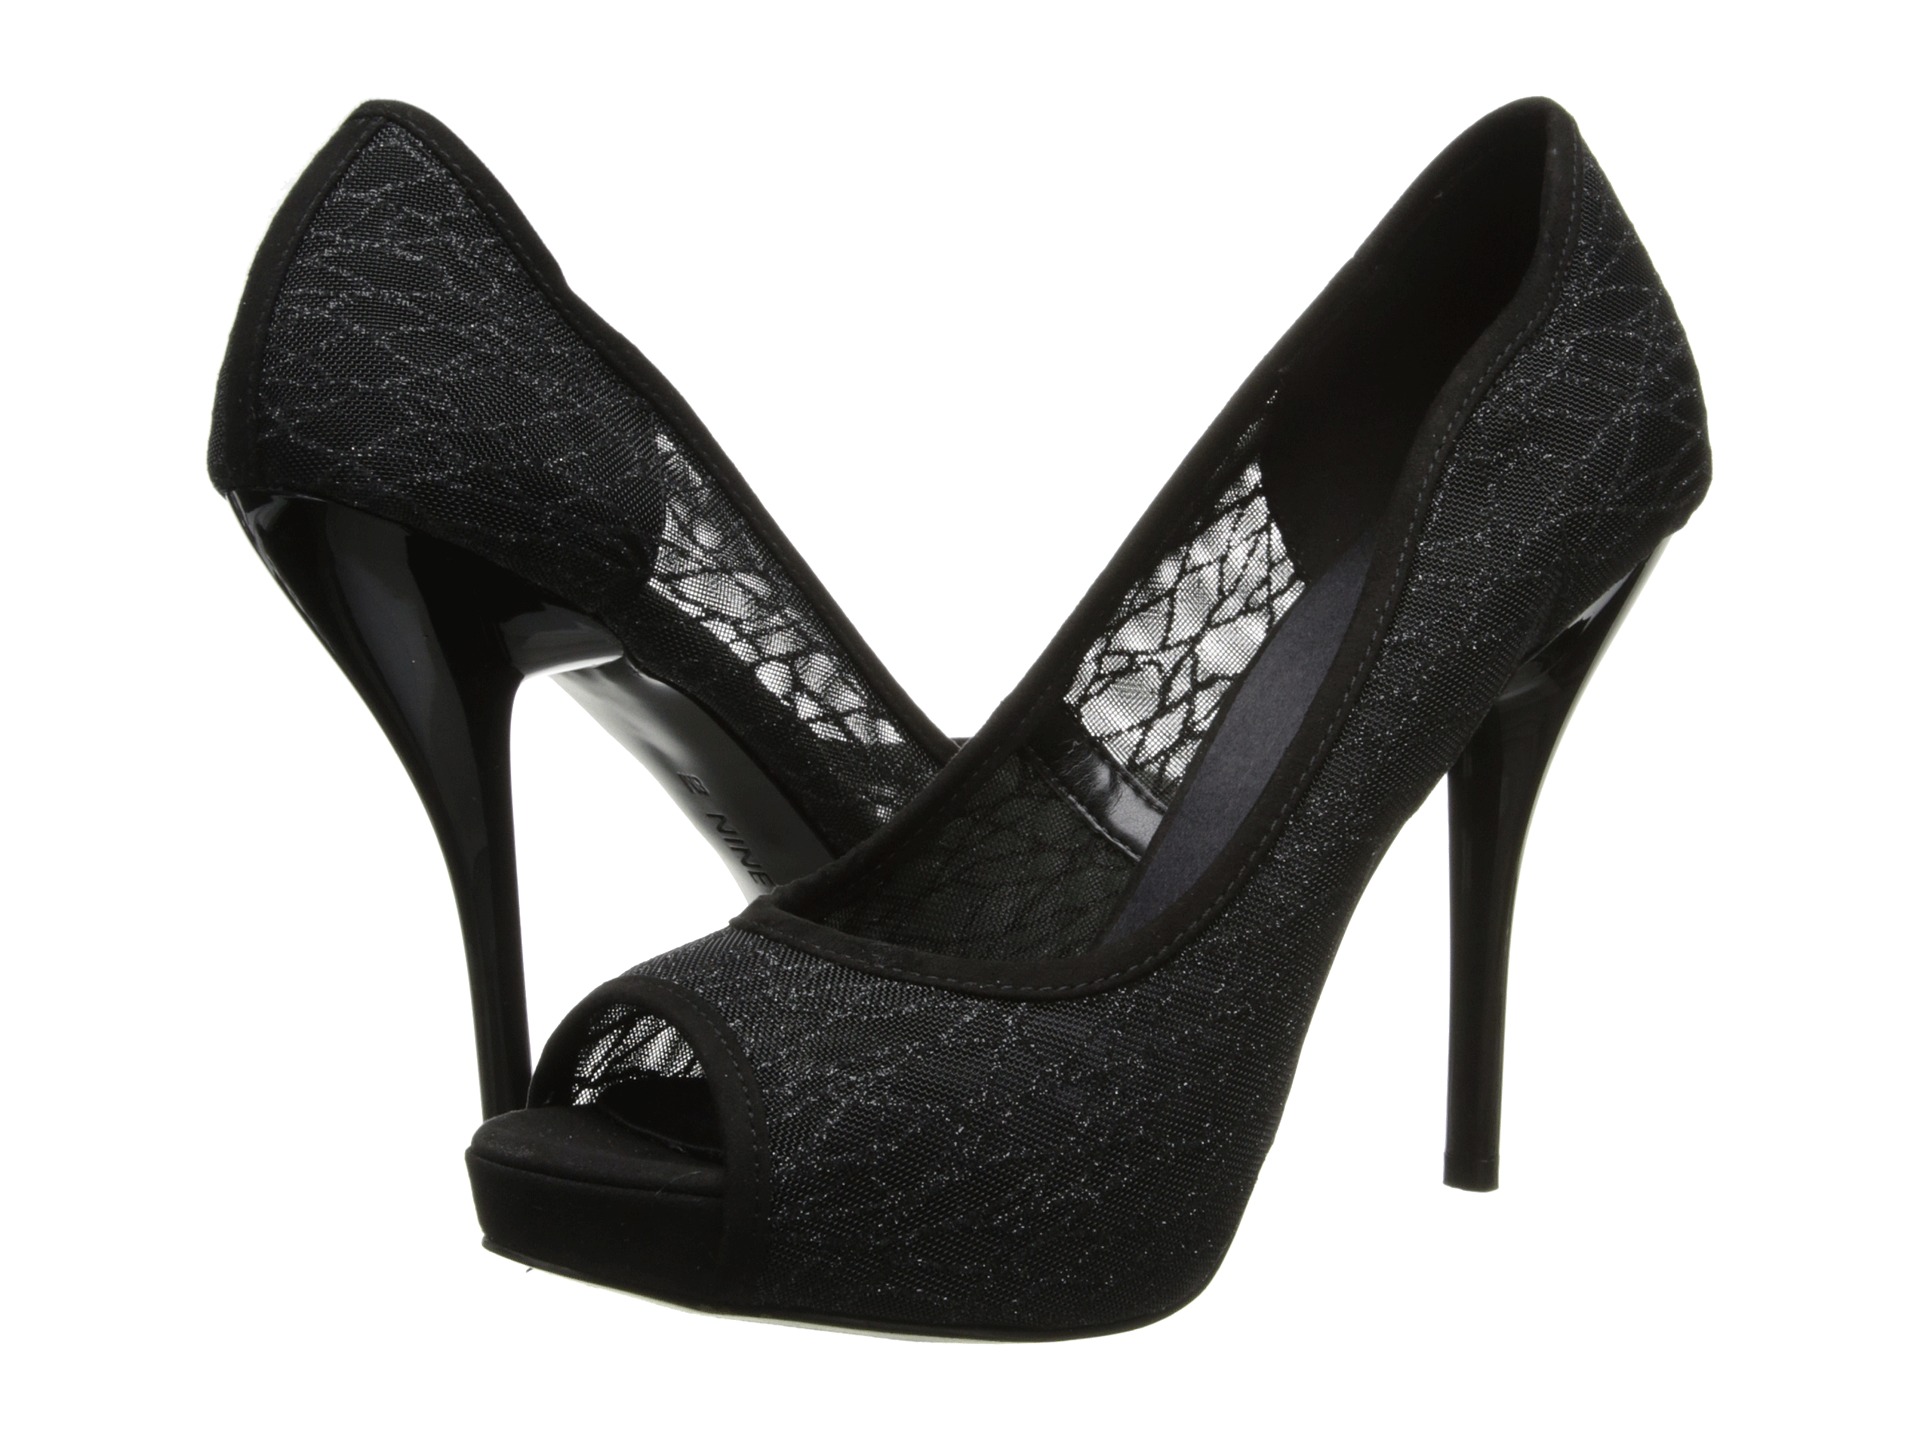 No results for nine west sweettalk - Search Zappos